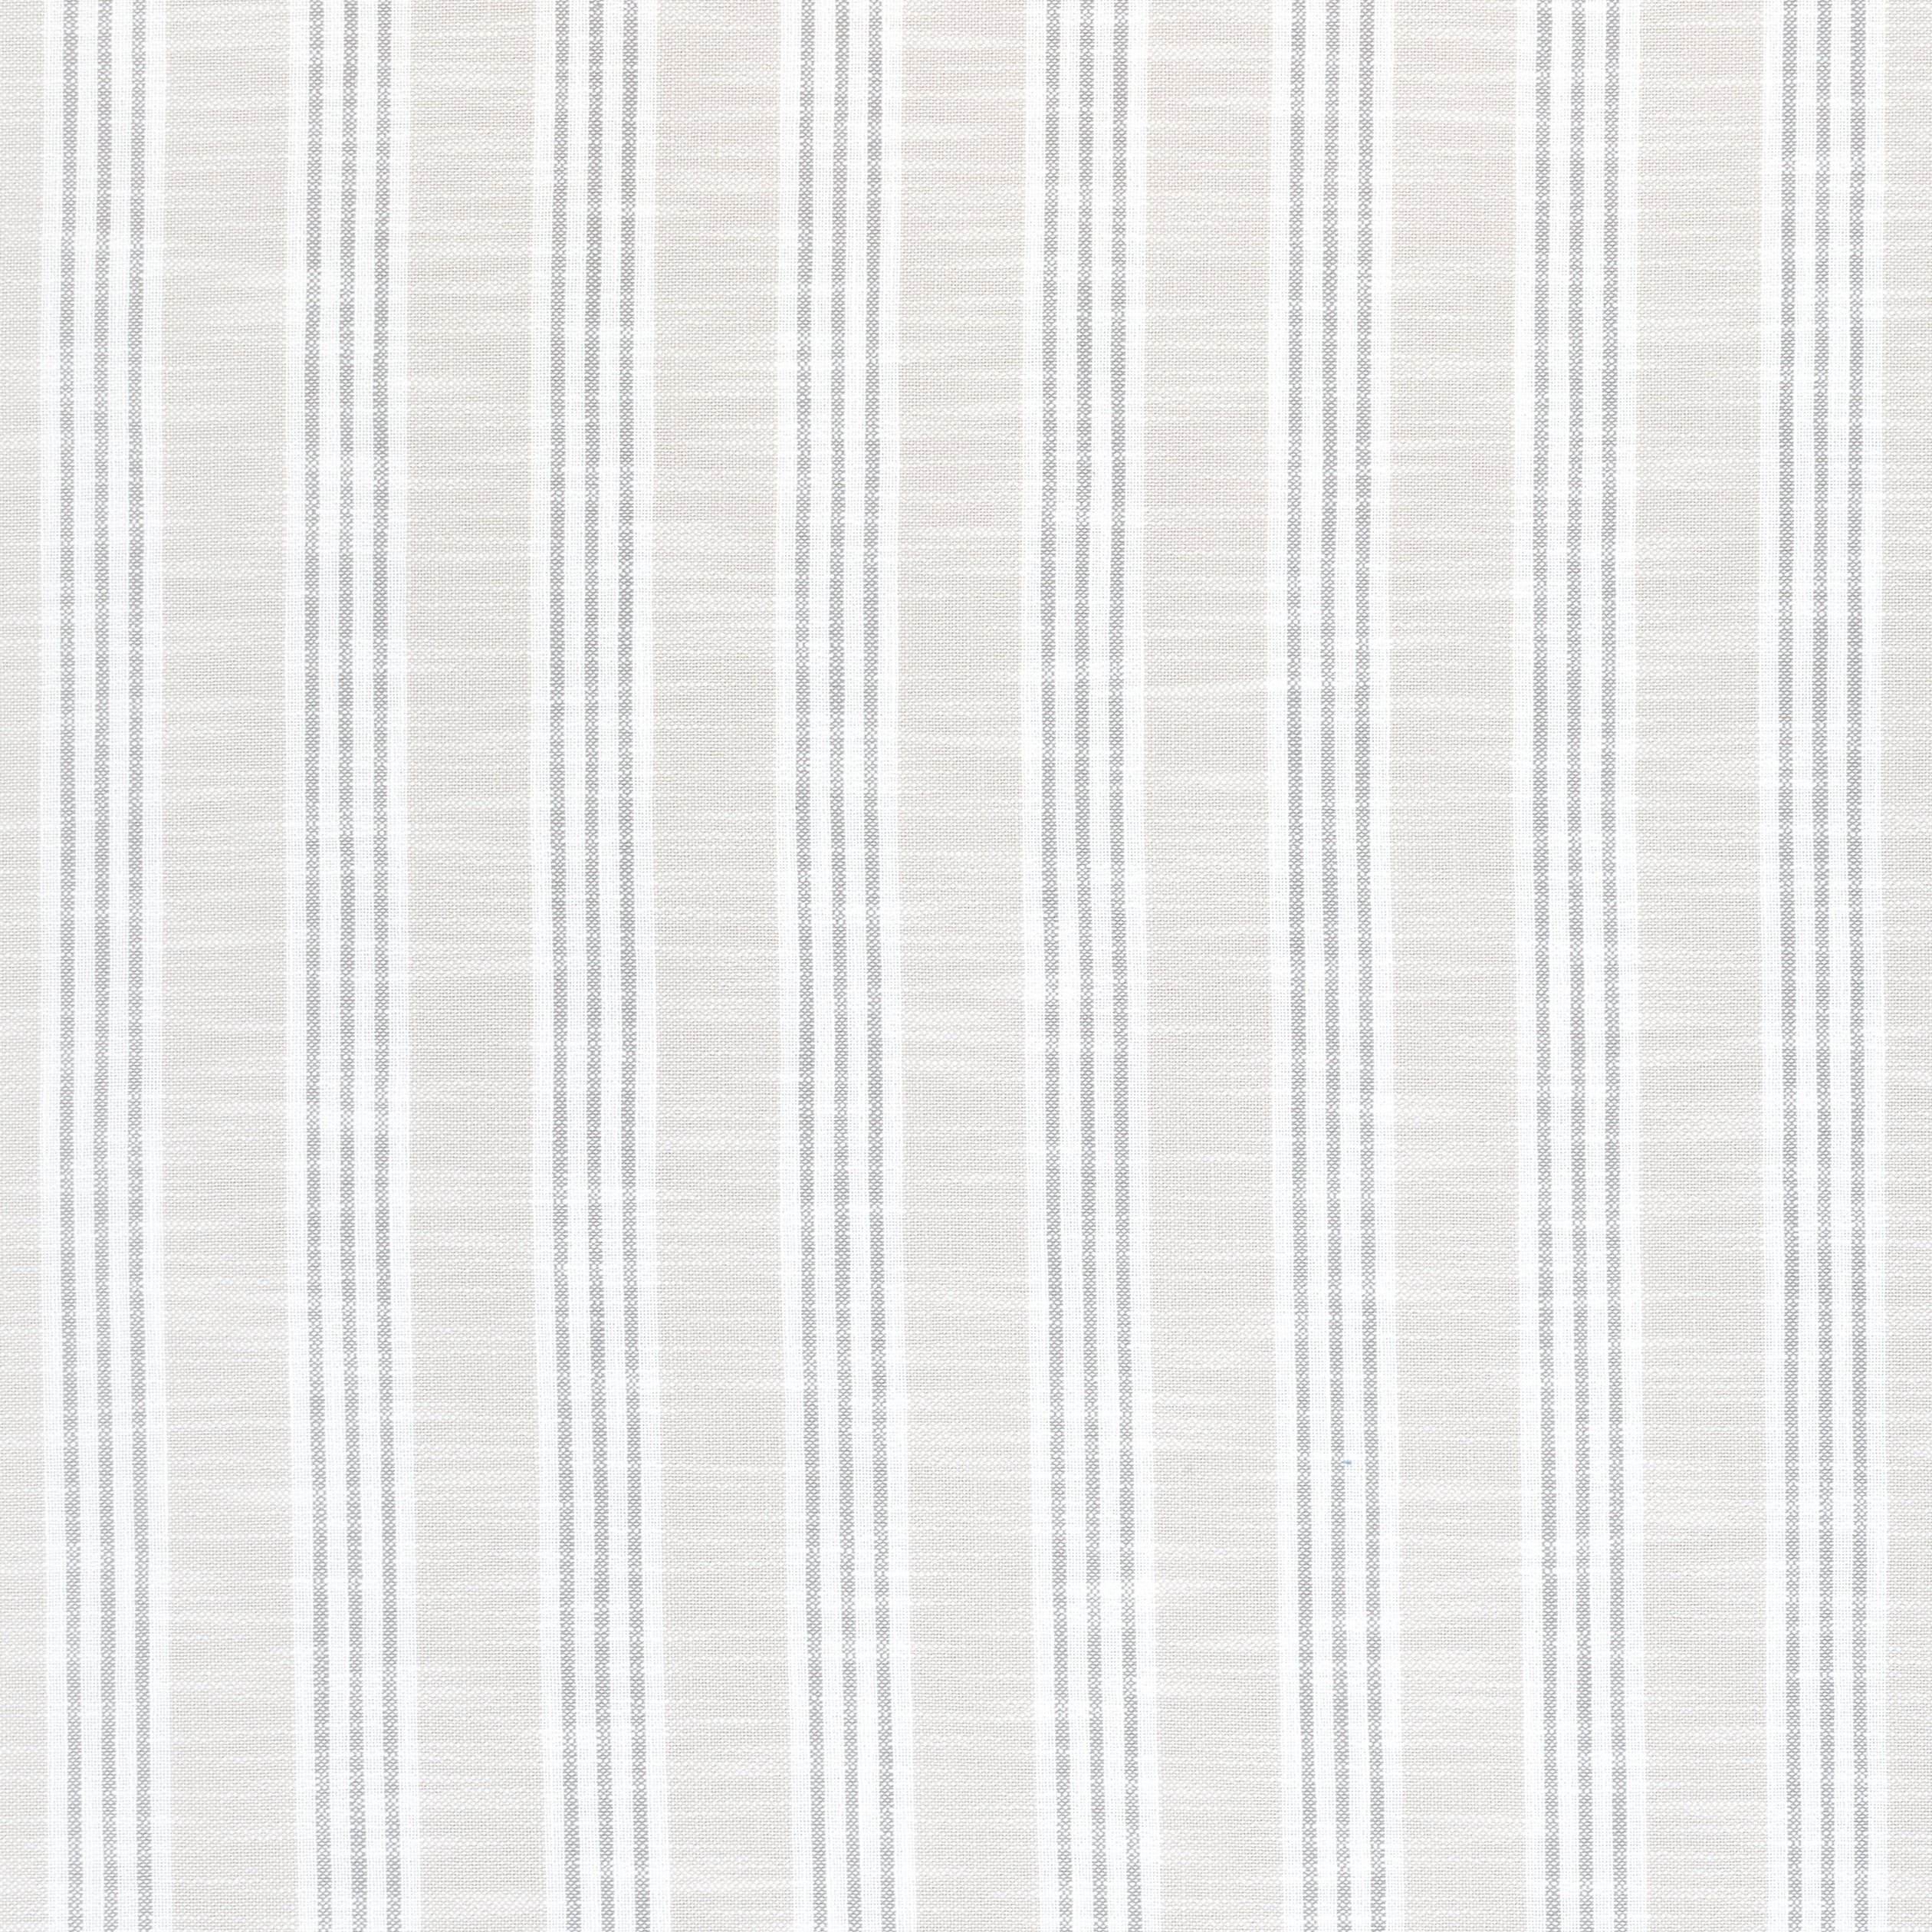 Southport Stripe fabric in flax and grey color - pattern number W73492 - by Thibaut in the Landmark collection